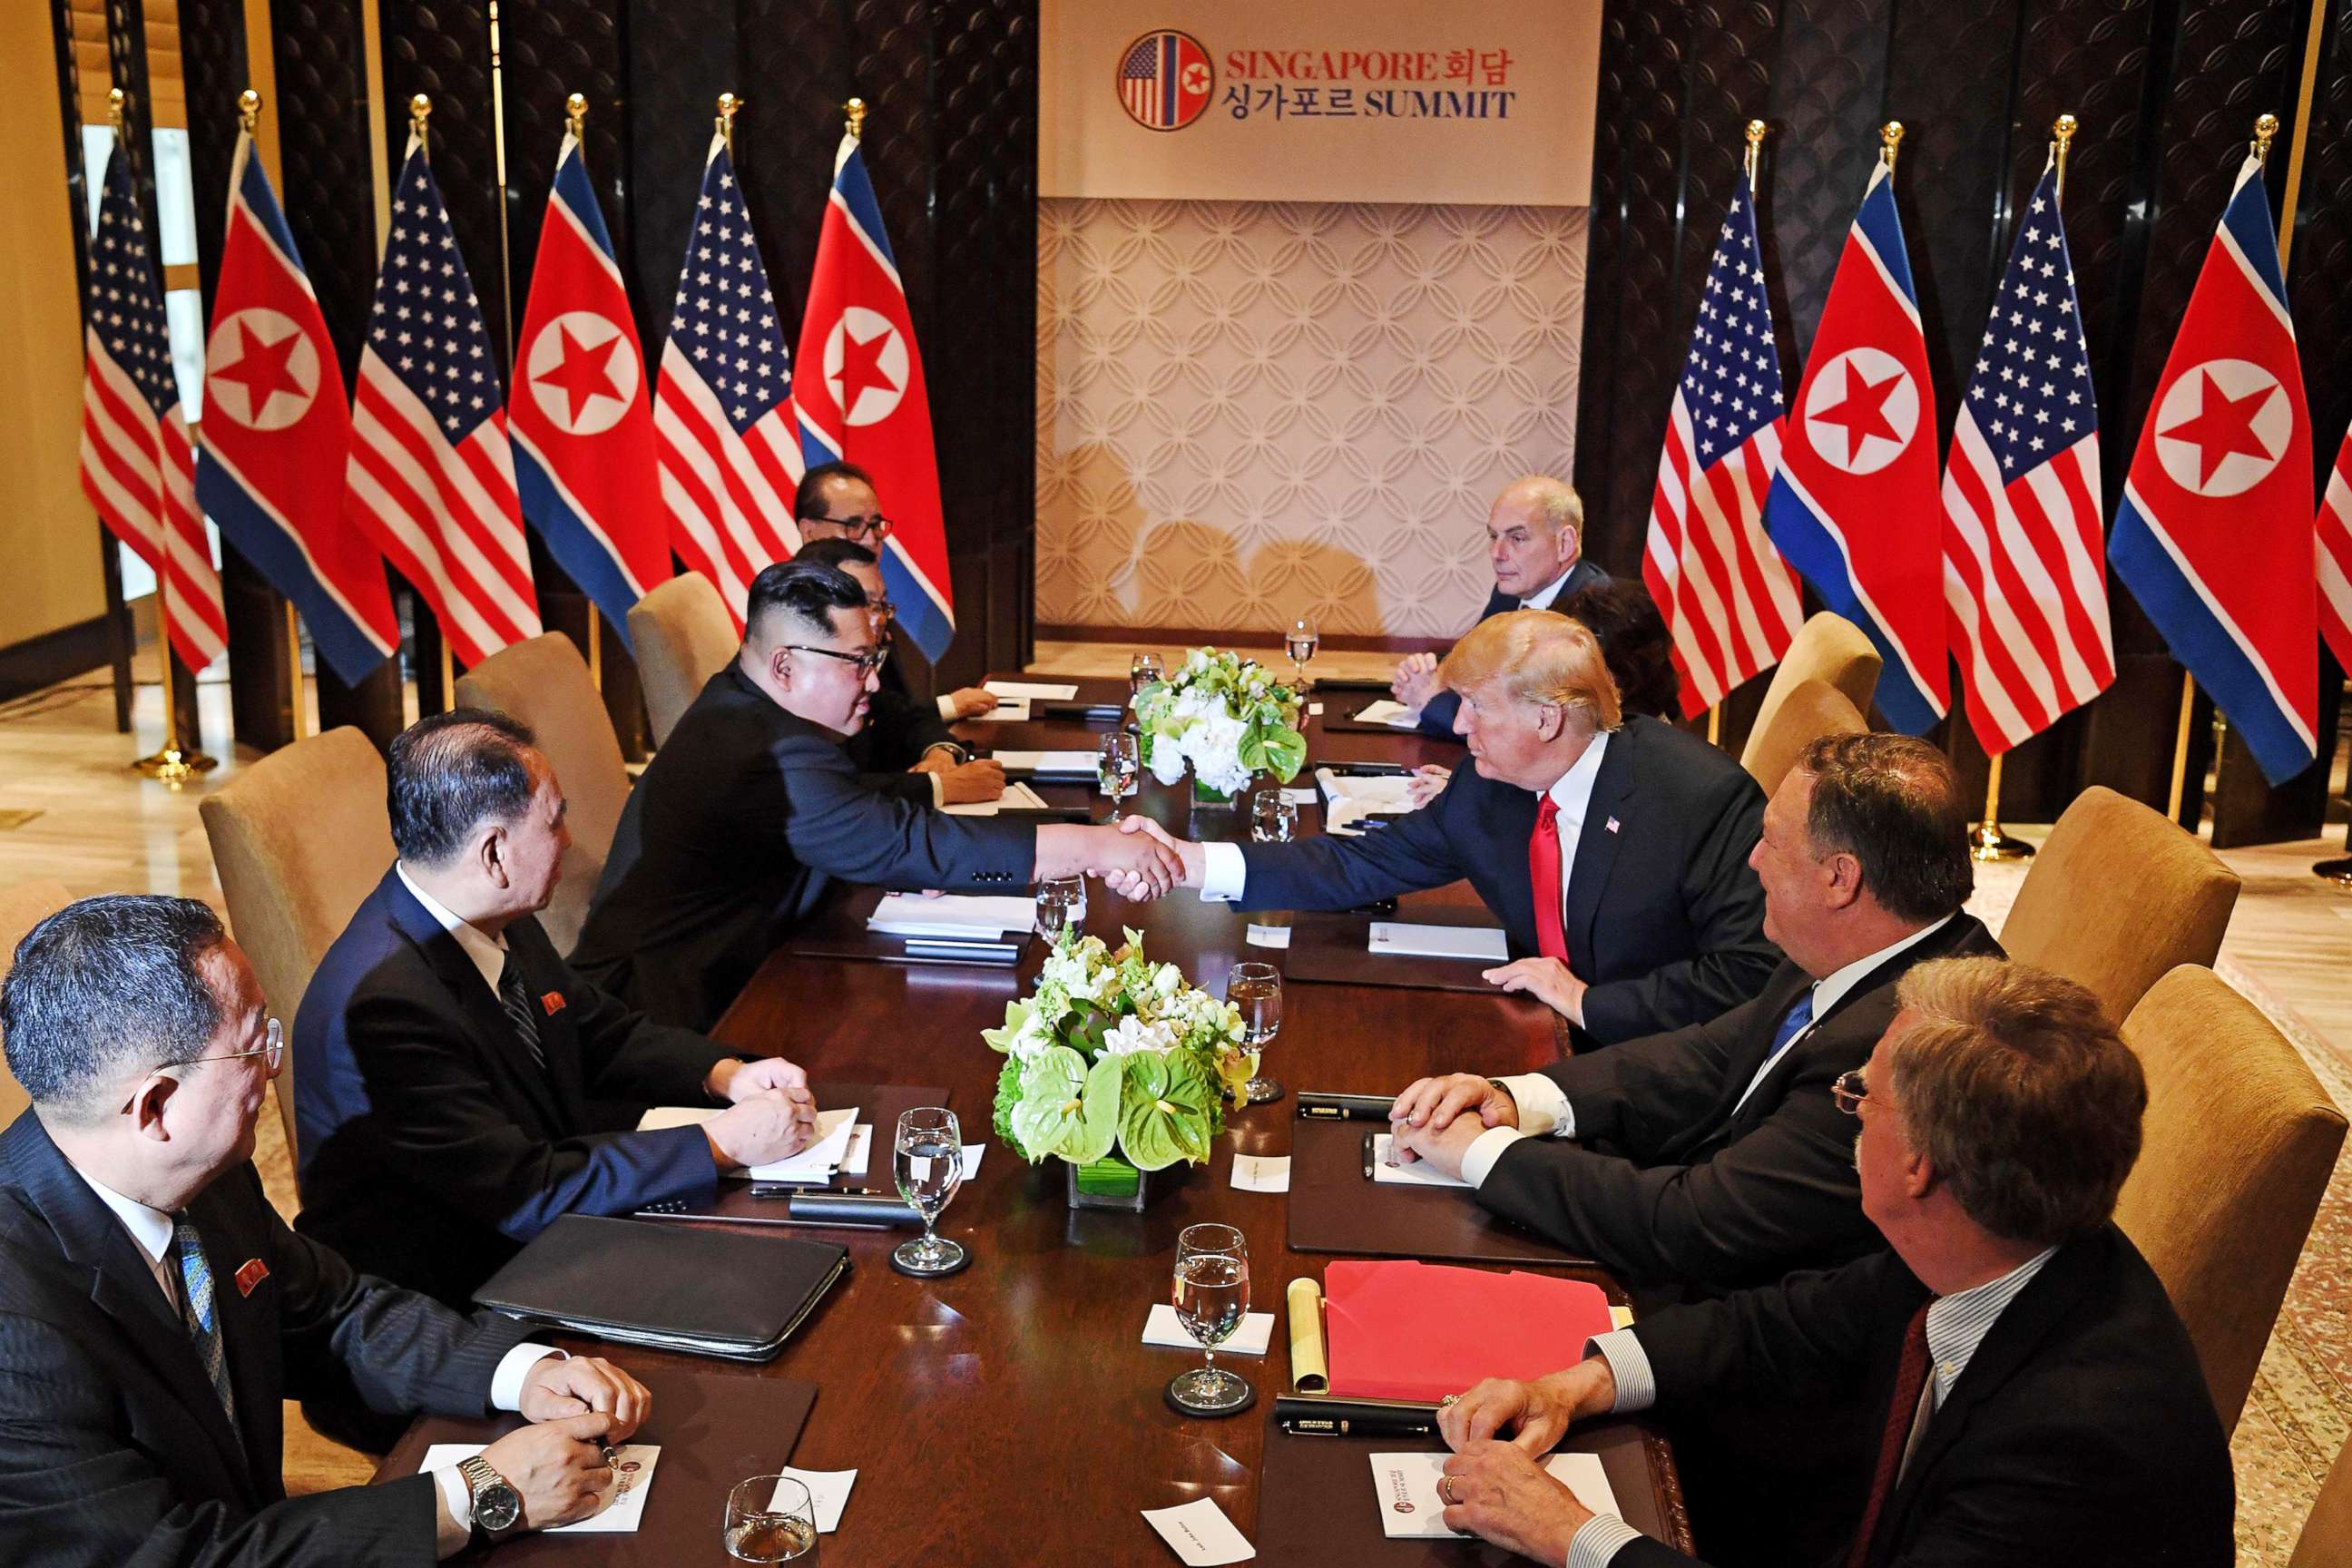 PHOTO: President Donald Trump shakes hands with North Korea's leader Kim Jong Un as they sit down with their respective delegations for the U.S.-North Korea summit, at the Capella Hotel on Sentosa island in Singapore on June 12, 2018.